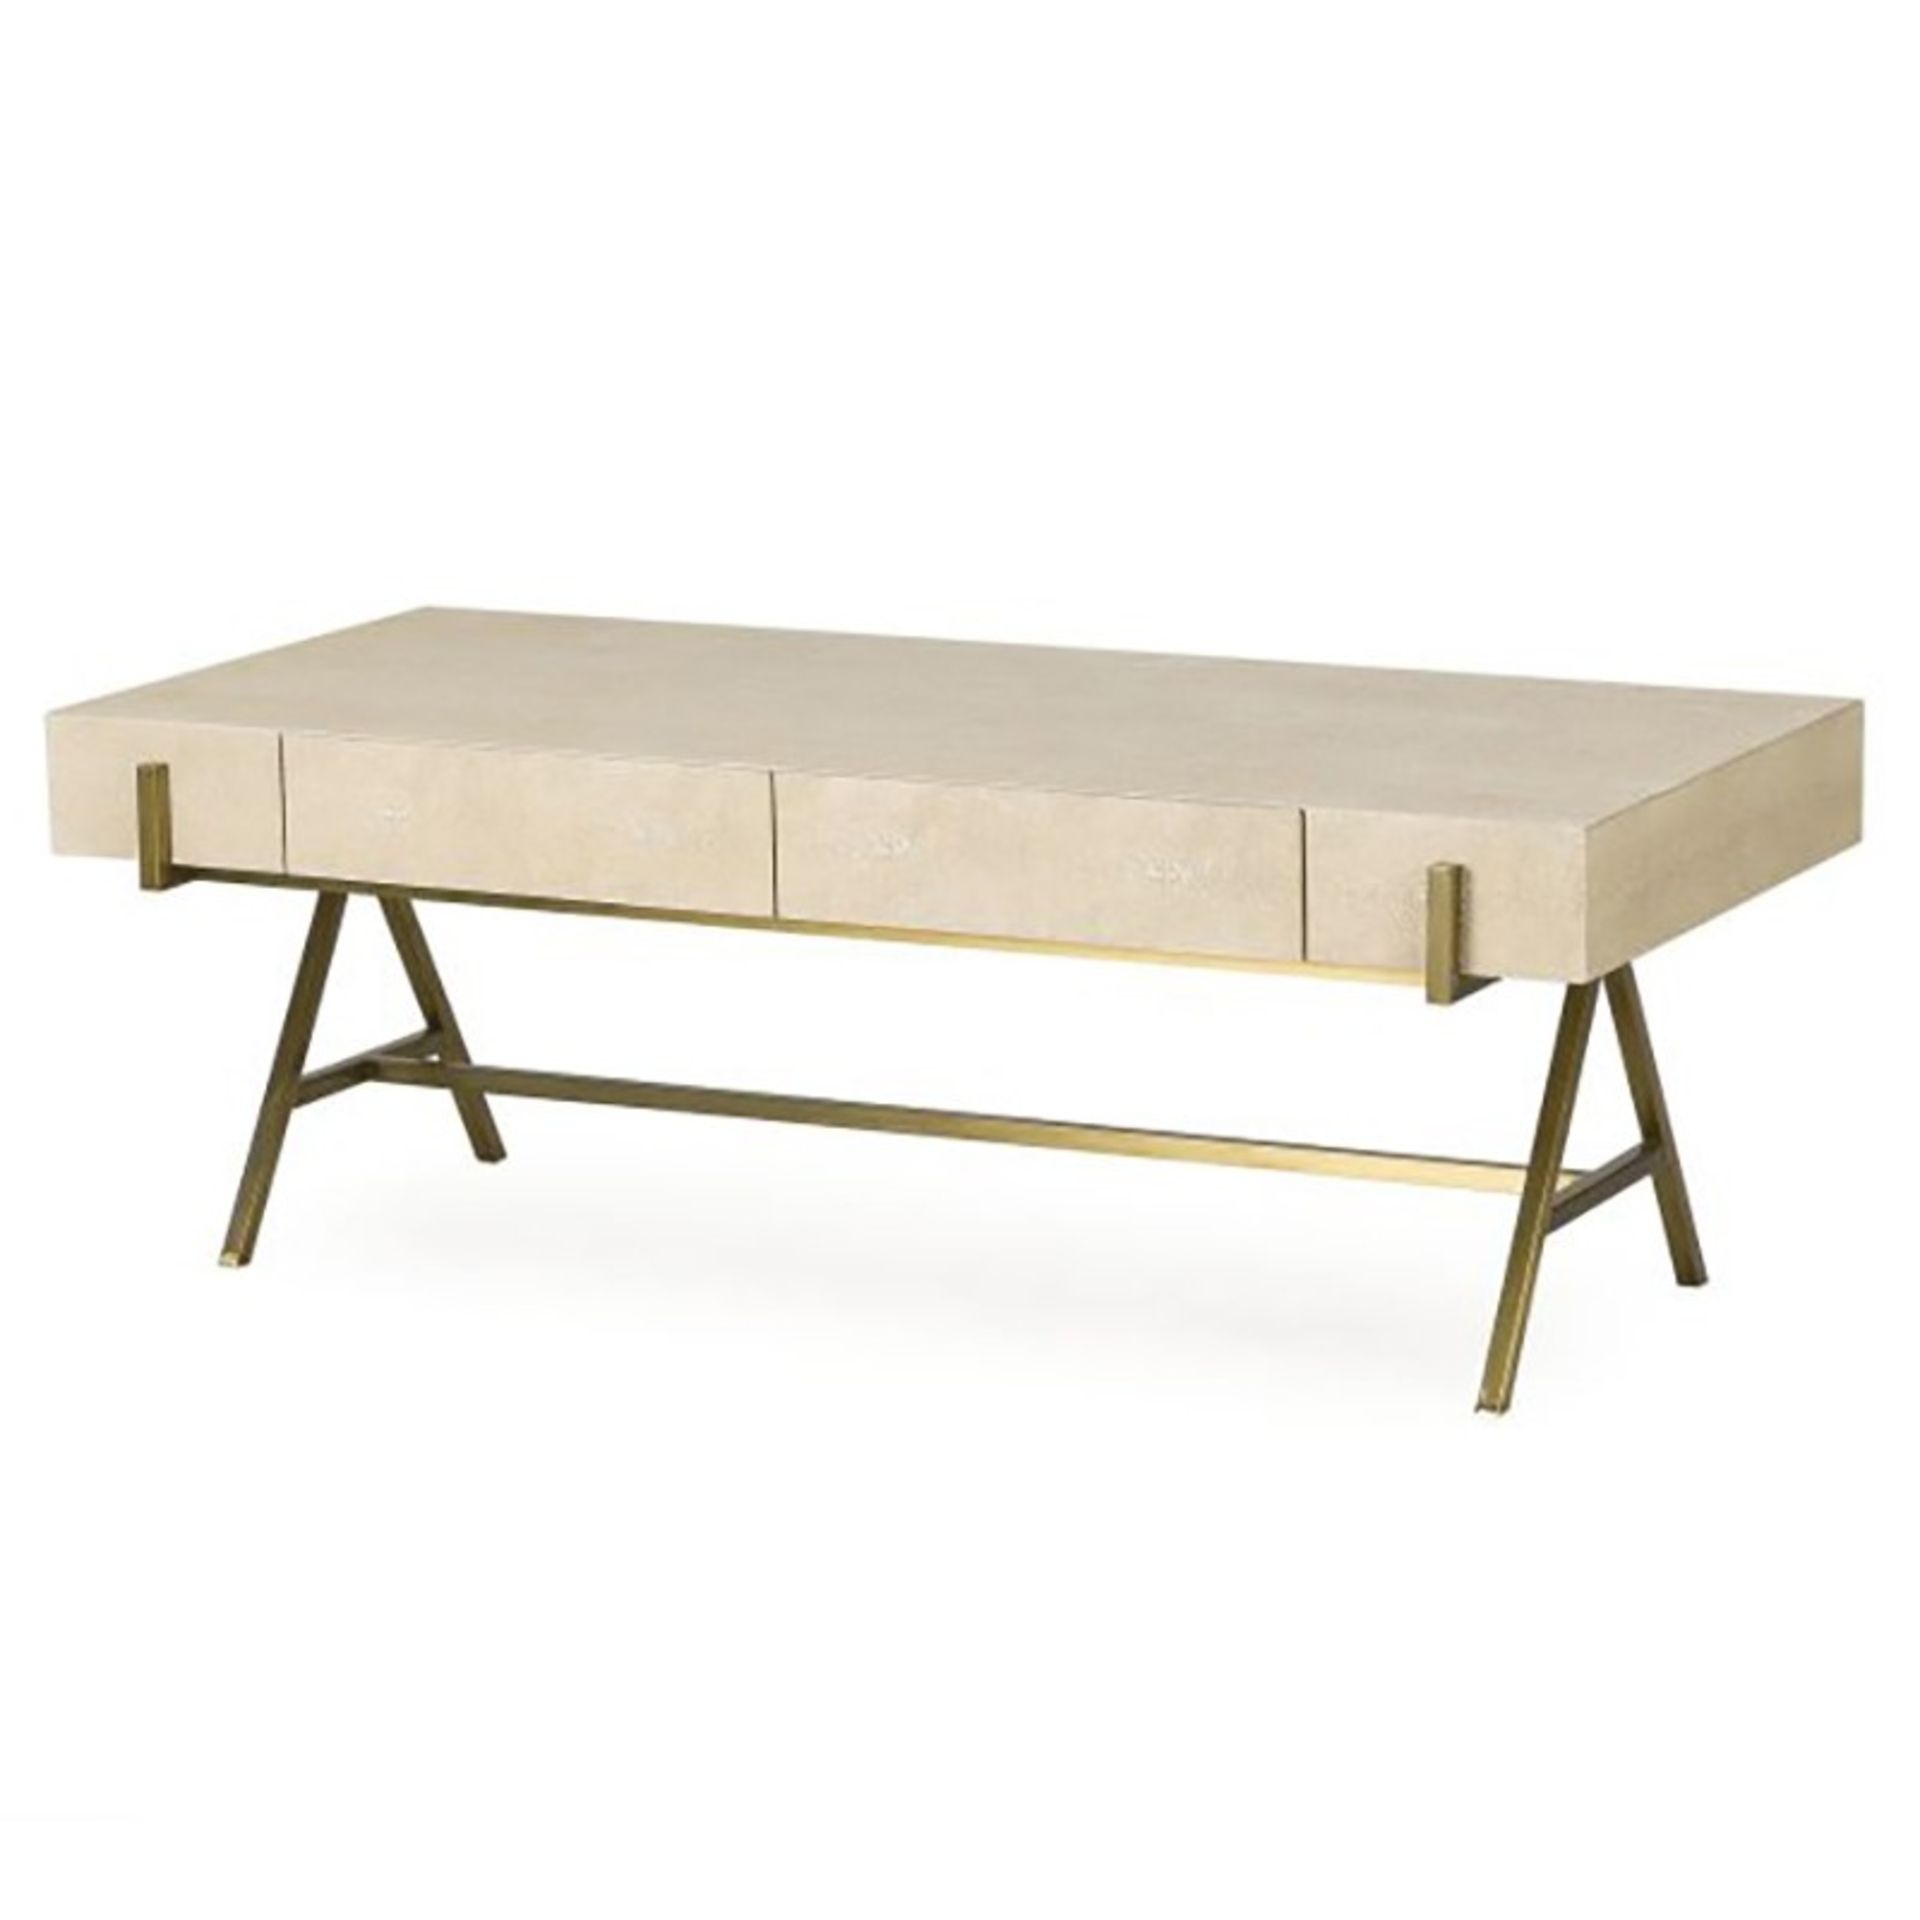 Delilah Coffee Table - Image 5 of 5